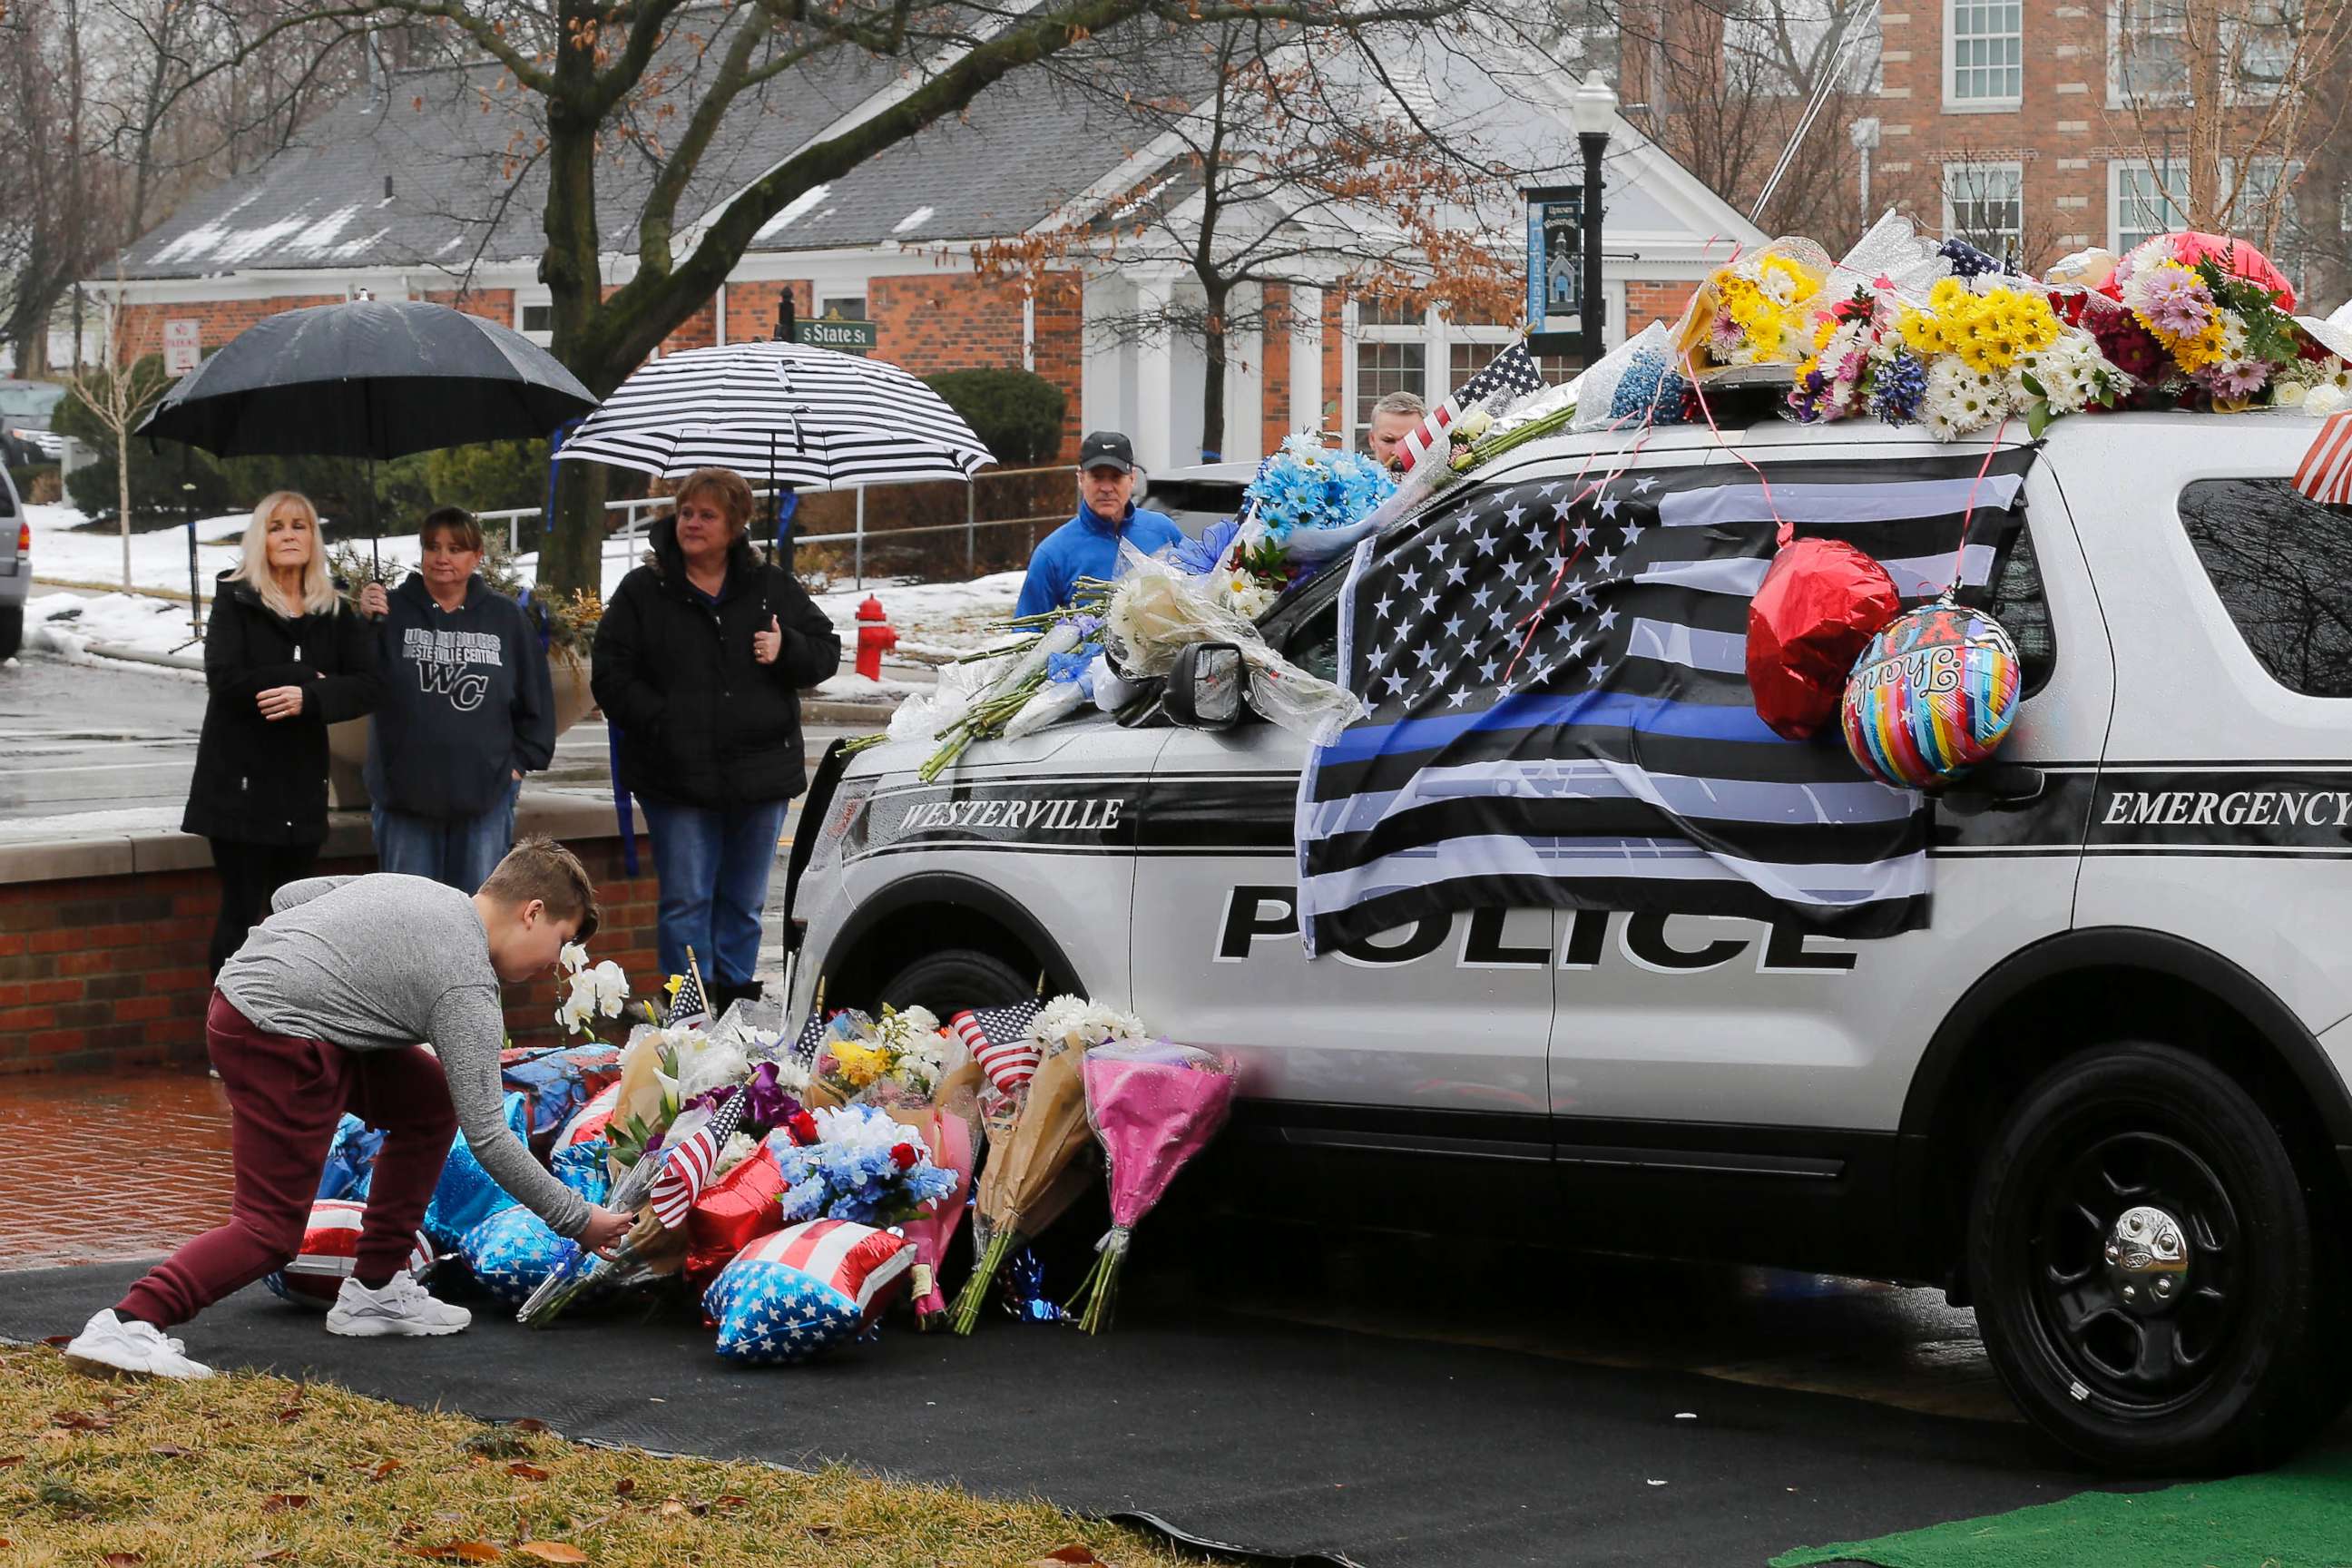 PHOTO: Mourners leave flowers on a police cruiser parked in front of City Hall in Westerville, Ohio, on Feb. 11, 2018. Westerville police officers Anthony Morelli and Eric Joering were killed in the line of duty on Feb. 10, 2018.